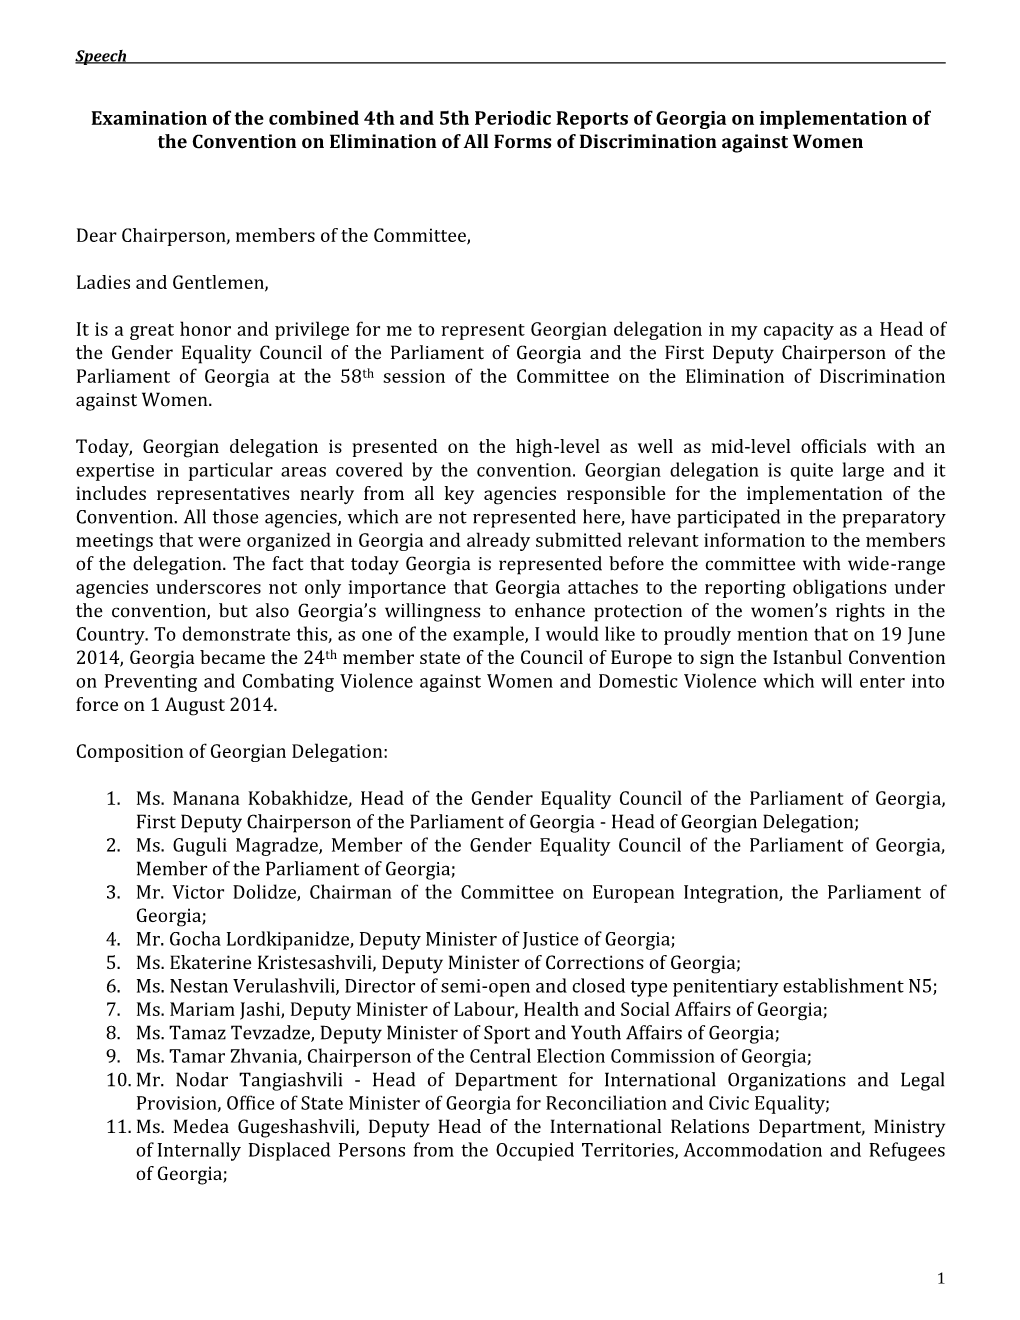 Examination of the Combined 4Th and 5Th Periodic Reports of Georgia on Implementation of the Convention on Elimination of All Forms of Discrimination Against Women